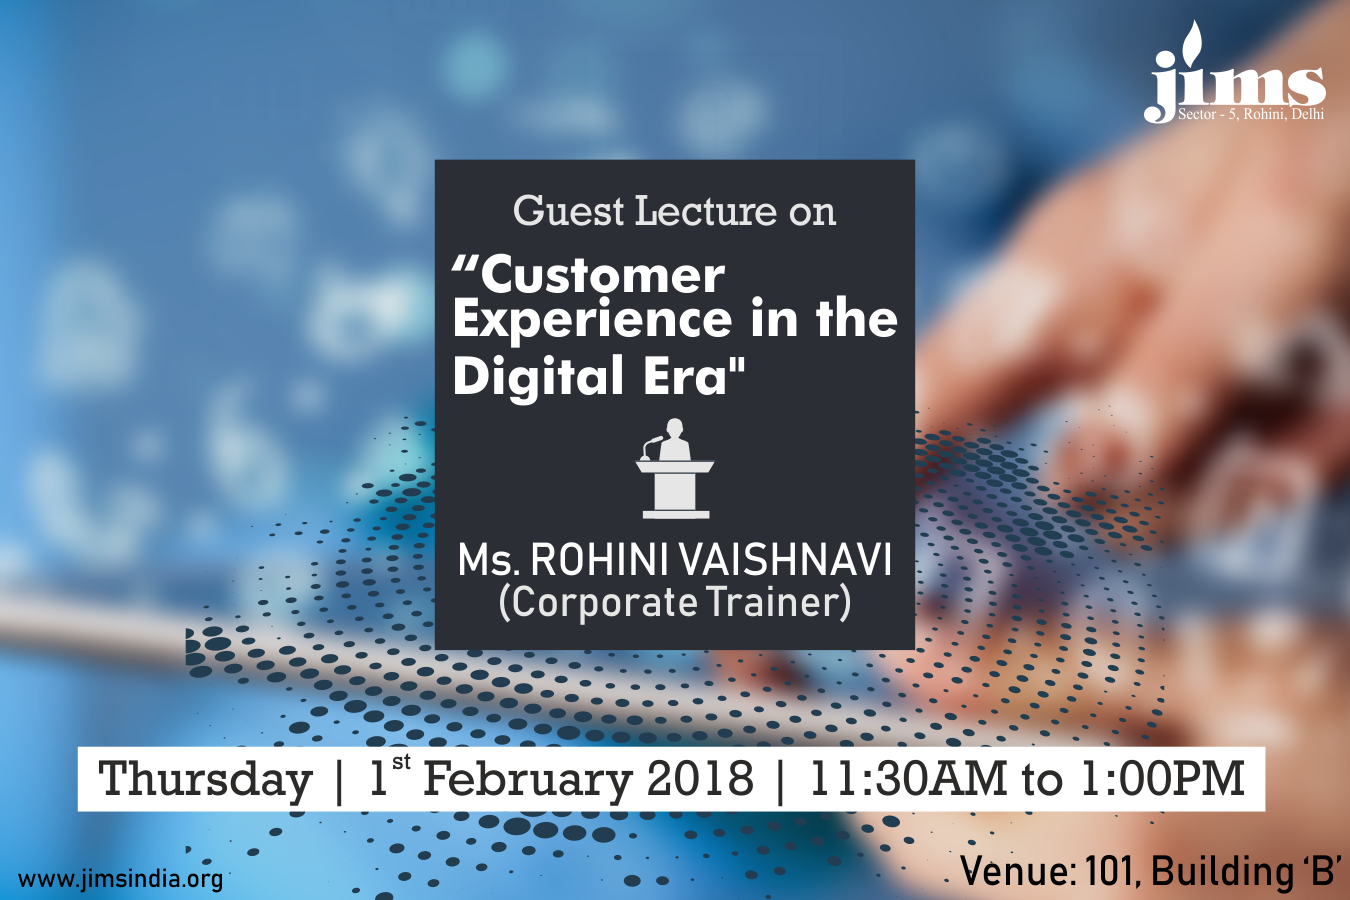 JIMS is organizing a Guest Lecture on Customer experience in the digital era